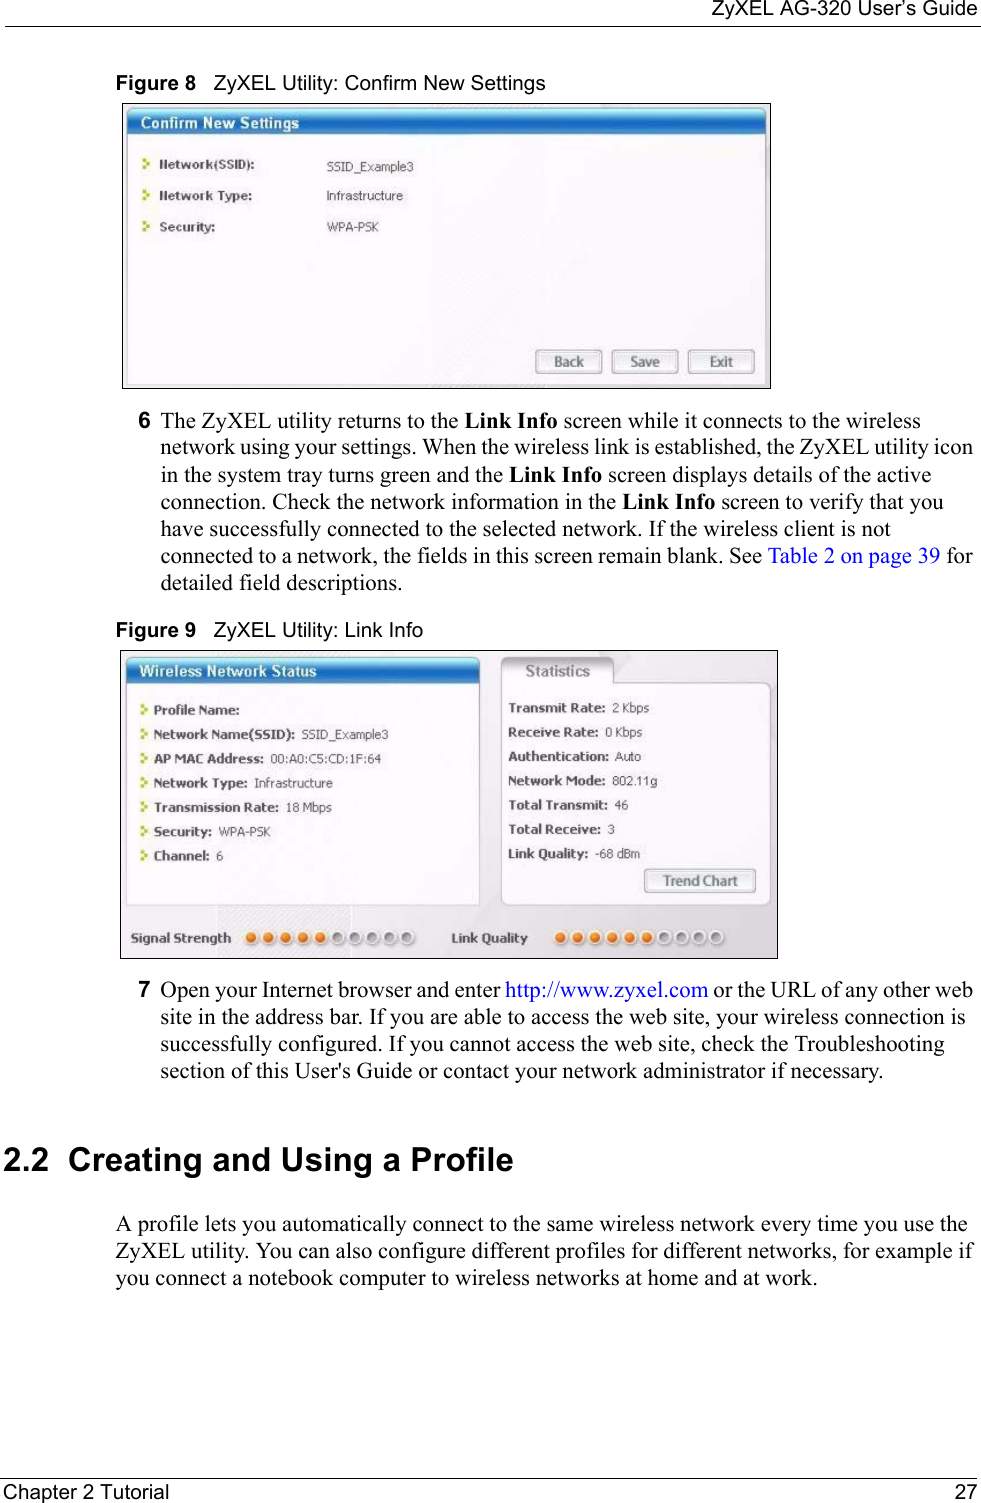 ZyXEL AG-320 User’s GuideChapter 2 Tutorial 27Figure 8   ZyXEL Utility: Confirm New Settings 6The ZyXEL utility returns to the Link Info screen while it connects to the wireless network using your settings. When the wireless link is established, the ZyXEL utility icon in the system tray turns green and the Link Info screen displays details of the active connection. Check the network information in the Link Info screen to verify that you have successfully connected to the selected network. If the wireless client is not connected to a network, the fields in this screen remain blank. See Table 2 on page 39 for detailed field descriptions.Figure 9   ZyXEL Utility: Link Info 7Open your Internet browser and enter http://www.zyxel.com or the URL of any other web site in the address bar. If you are able to access the web site, your wireless connection is successfully configured. If you cannot access the web site, check the Troubleshooting section of this User&apos;s Guide or contact your network administrator if necessary.2.2  Creating and Using a ProfileA profile lets you automatically connect to the same wireless network every time you use the ZyXEL utility. You can also configure different profiles for different networks, for example if you connect a notebook computer to wireless networks at home and at work.